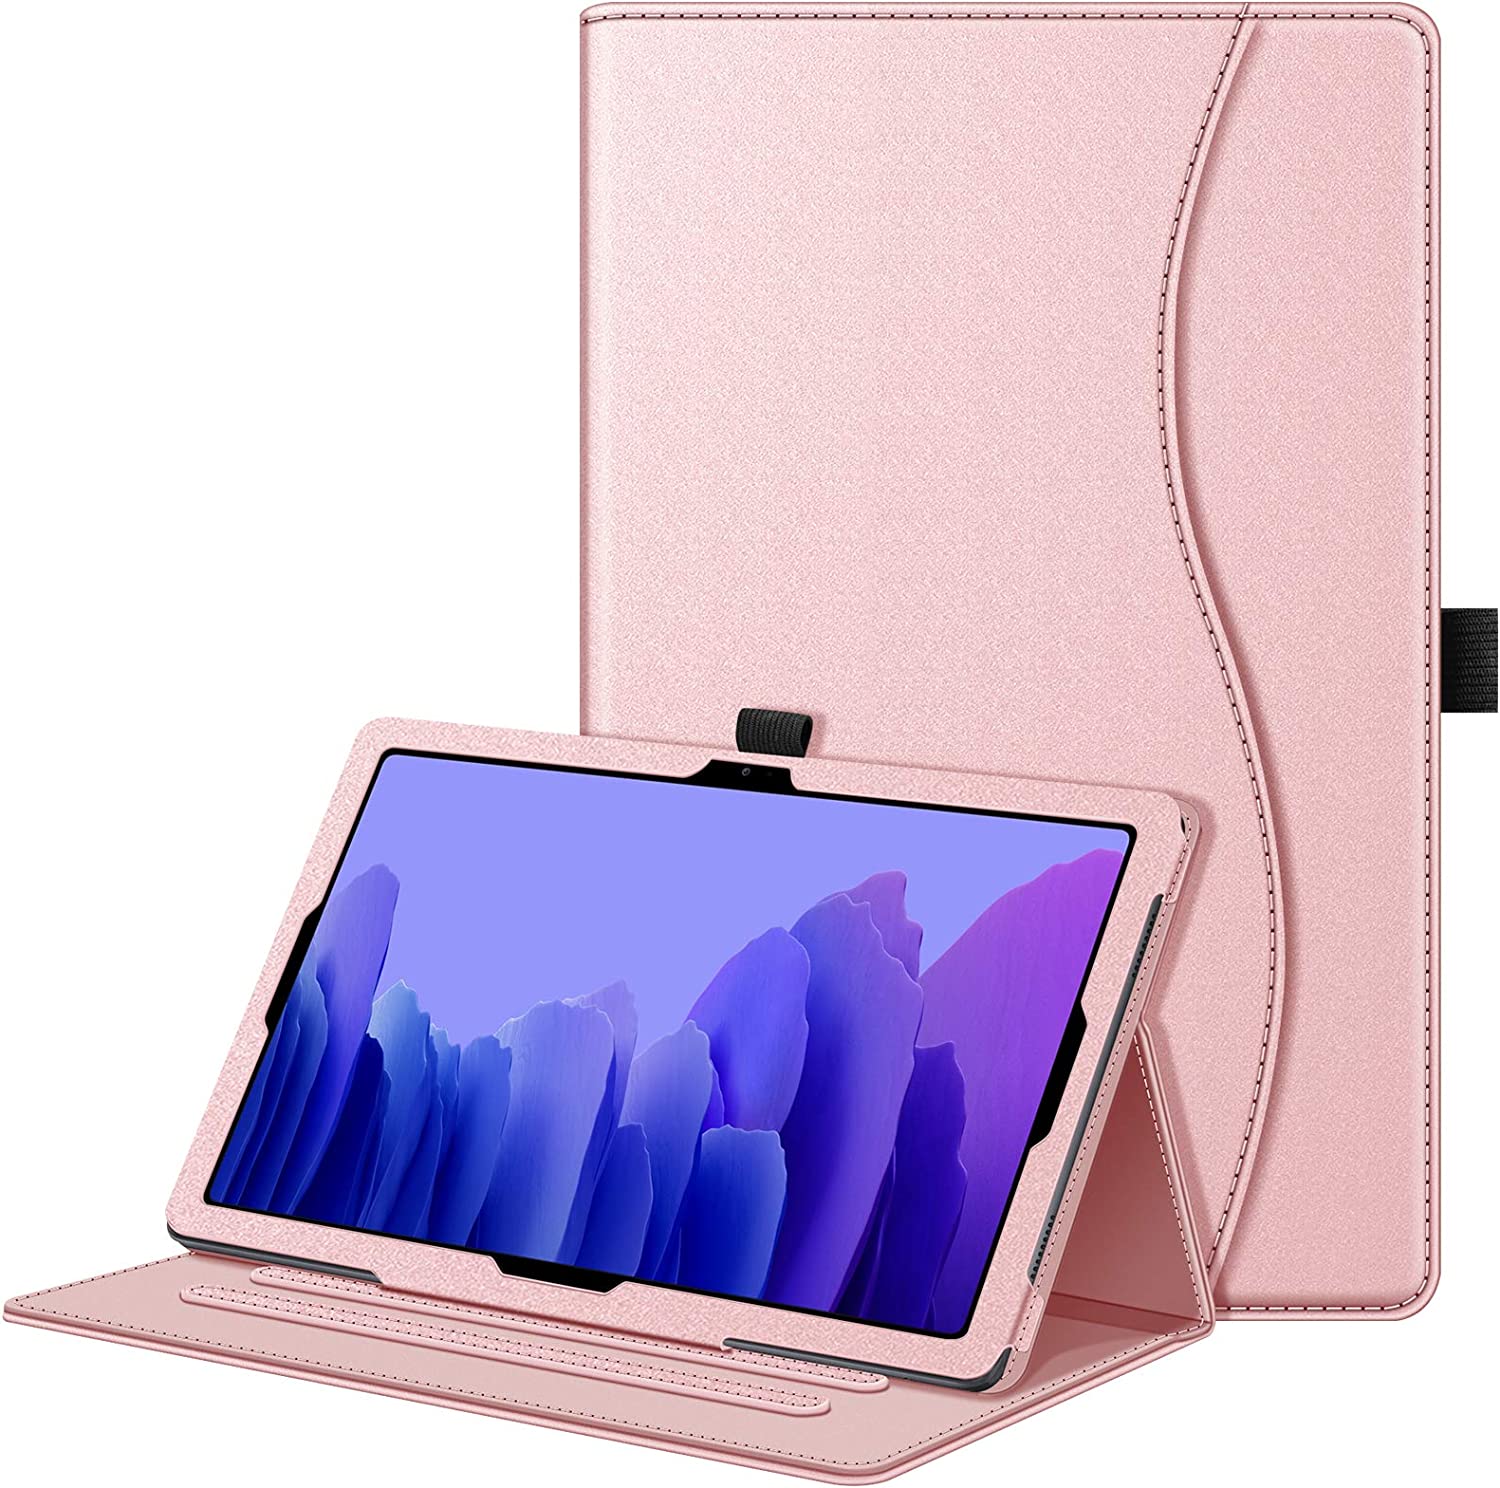 A product image of the Fintie case for the Galaxy Tab A7 10.4.